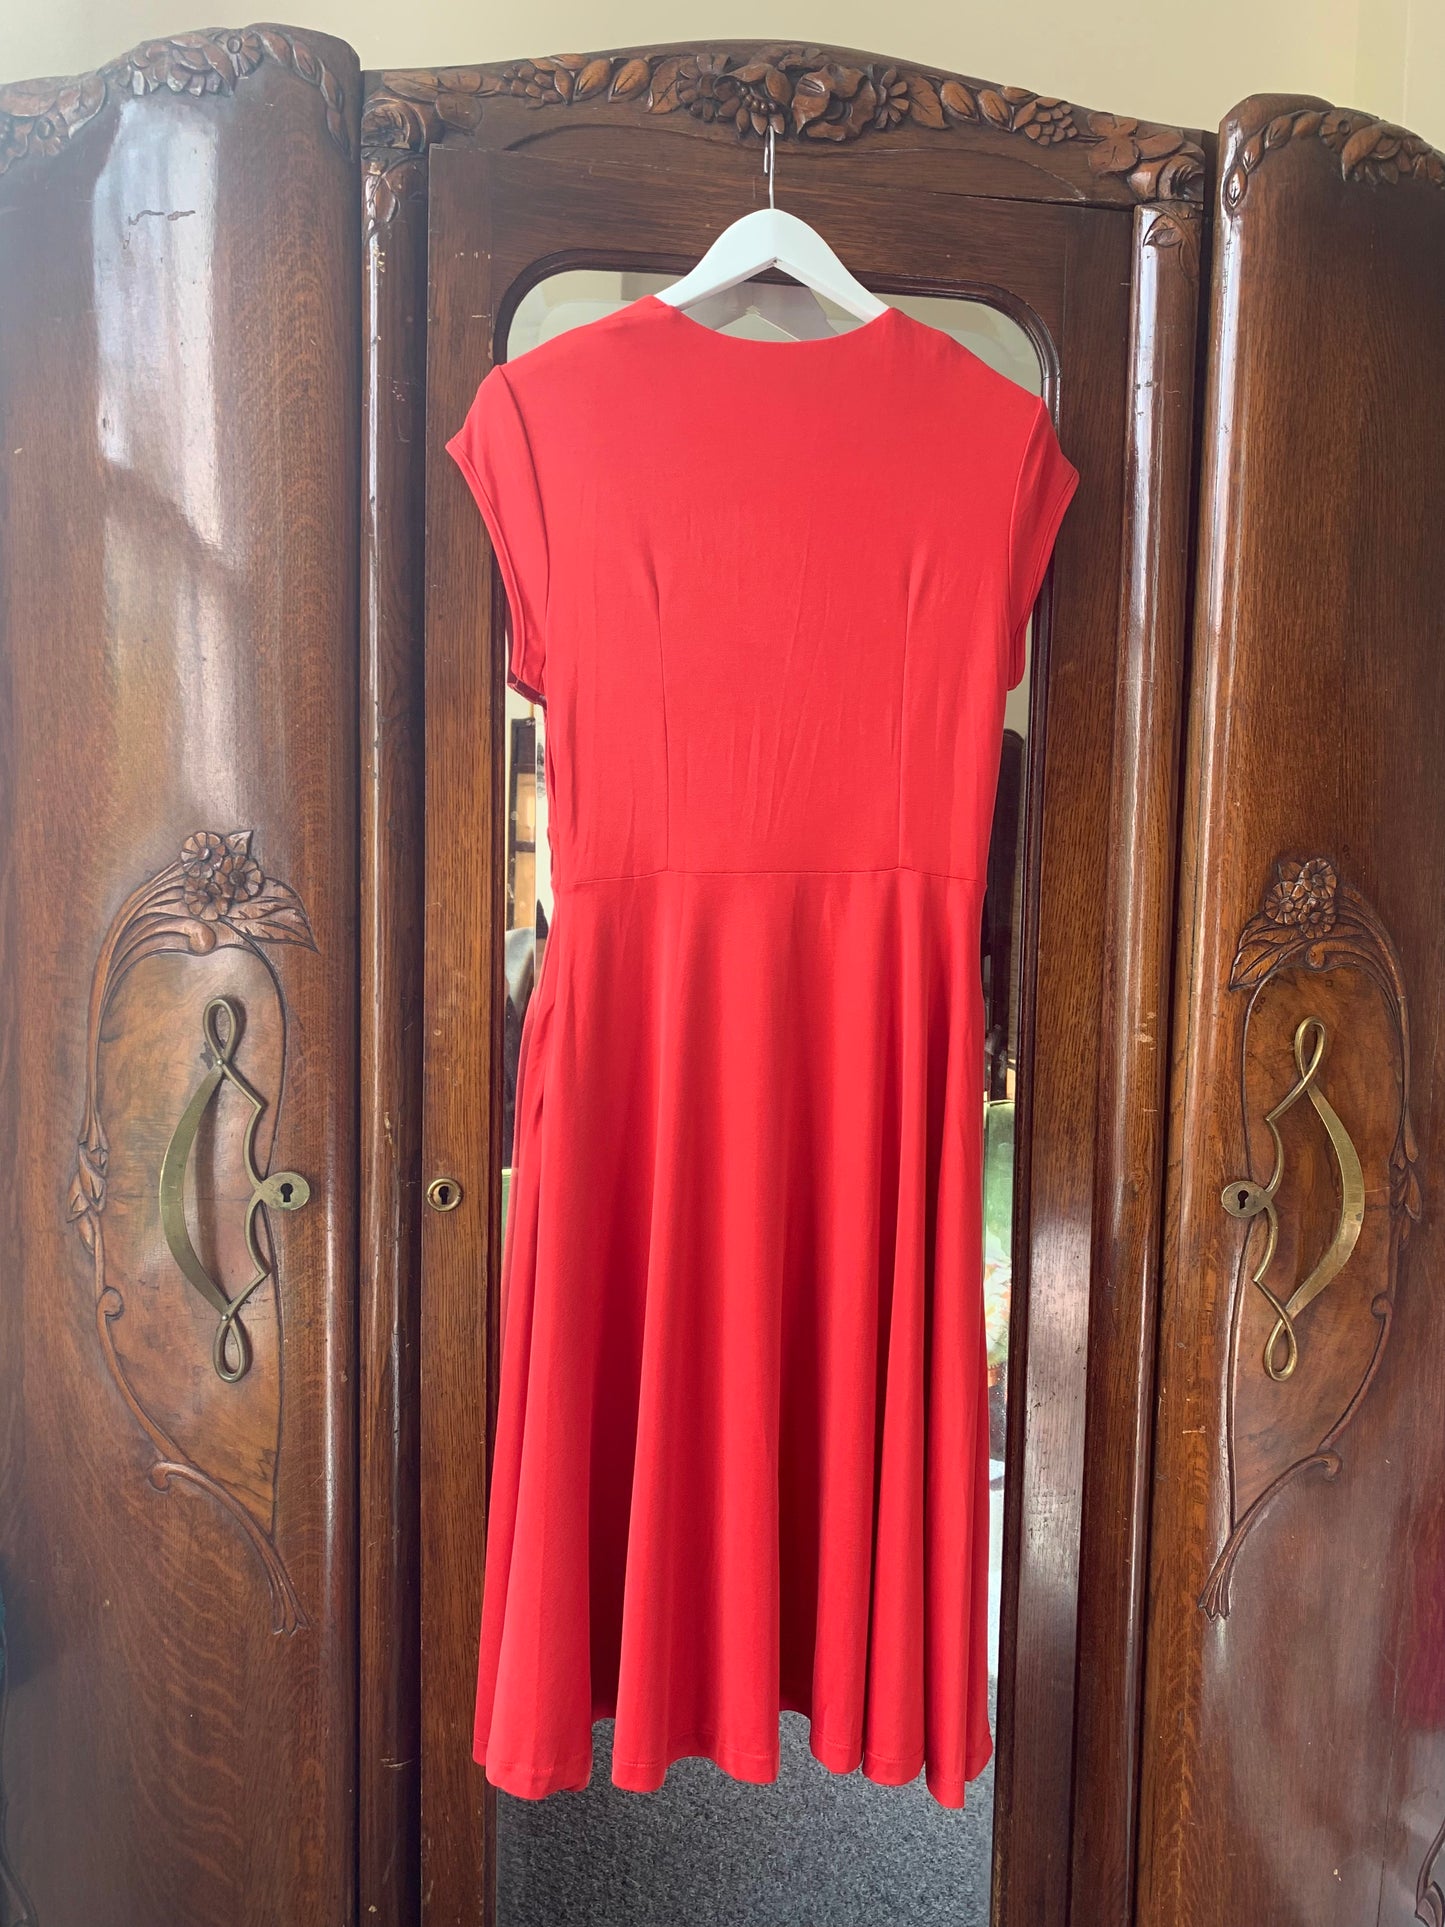 SAMPLE Piccadilly Dress red stretch Jersey 12-14